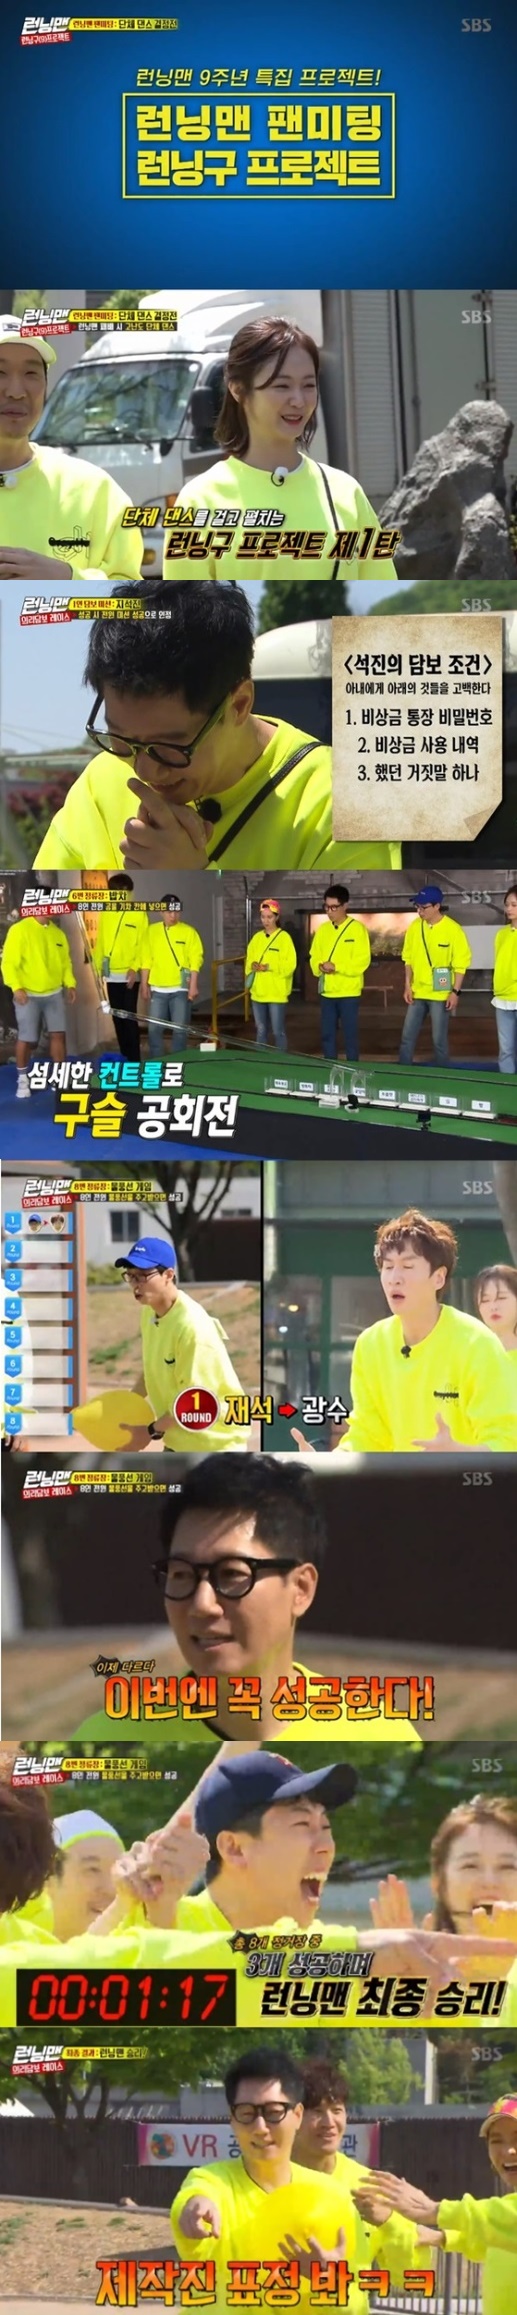 SBS Running Man first unveiled its 9th anniversary special project Running Man Fan Meeting - Running Zone Project, which greatly boosted its ratings.According to Nielsen Korea, a ratings agency, Running Man, which aired on the 19th, recorded 5.1% (based on the second part of the audience rating of households in the Seoul Capital Area), up from last week in the 2049 Target rating, an important indicator of major advertising officials.The average audience rating also rose, reaching 5.3% in the first part and 8.4% in the second part (based on the audience rating of households in the Seoul Seoul Capital Area). The highest audience rating per minute rose to 8.9%.As previously announced, the 9th anniversary special project Running Man Fan Meeting - Running Zone Project was first released on the day.The production team and members, who had a special race for four weeks over the right to organize a fan meeting queue sheet, played their first showdown on the show with Group Dance.If the members win, they can dance in addition to the candidate dance prepared by the production team, but if they are defeated, they should dance recommended by the production team.The members were united in teamwork and started a fierce 8th round confrontation with the production team, eventually winning three wins and winning the victory.The scene had the highest audience rating of 8.9% per minute, accounting for the best one minute.